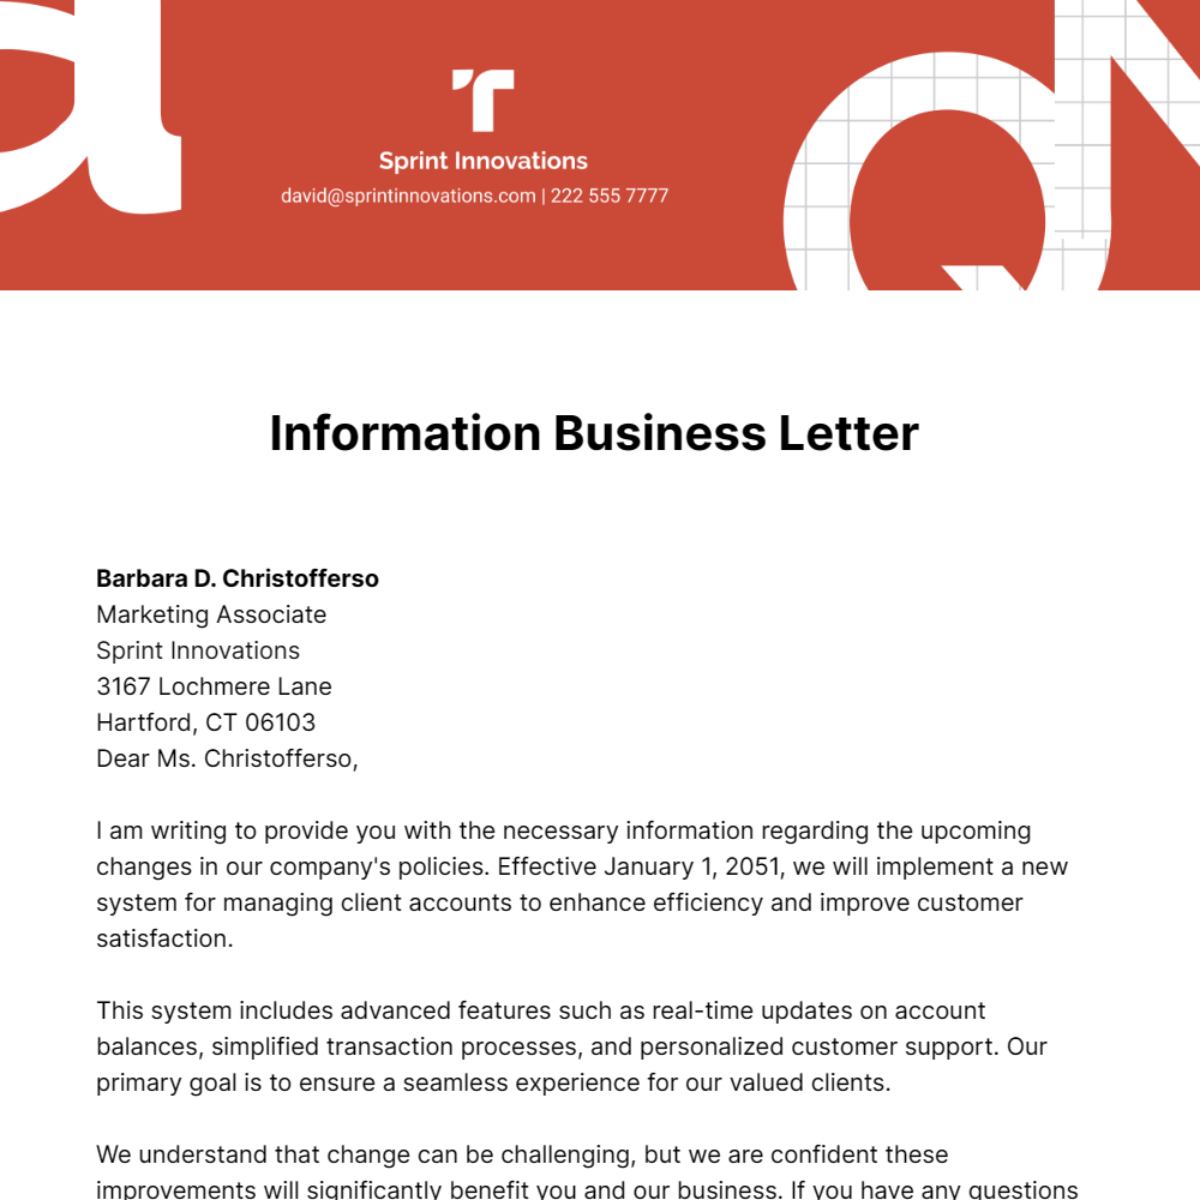 Information Business Letter   Template